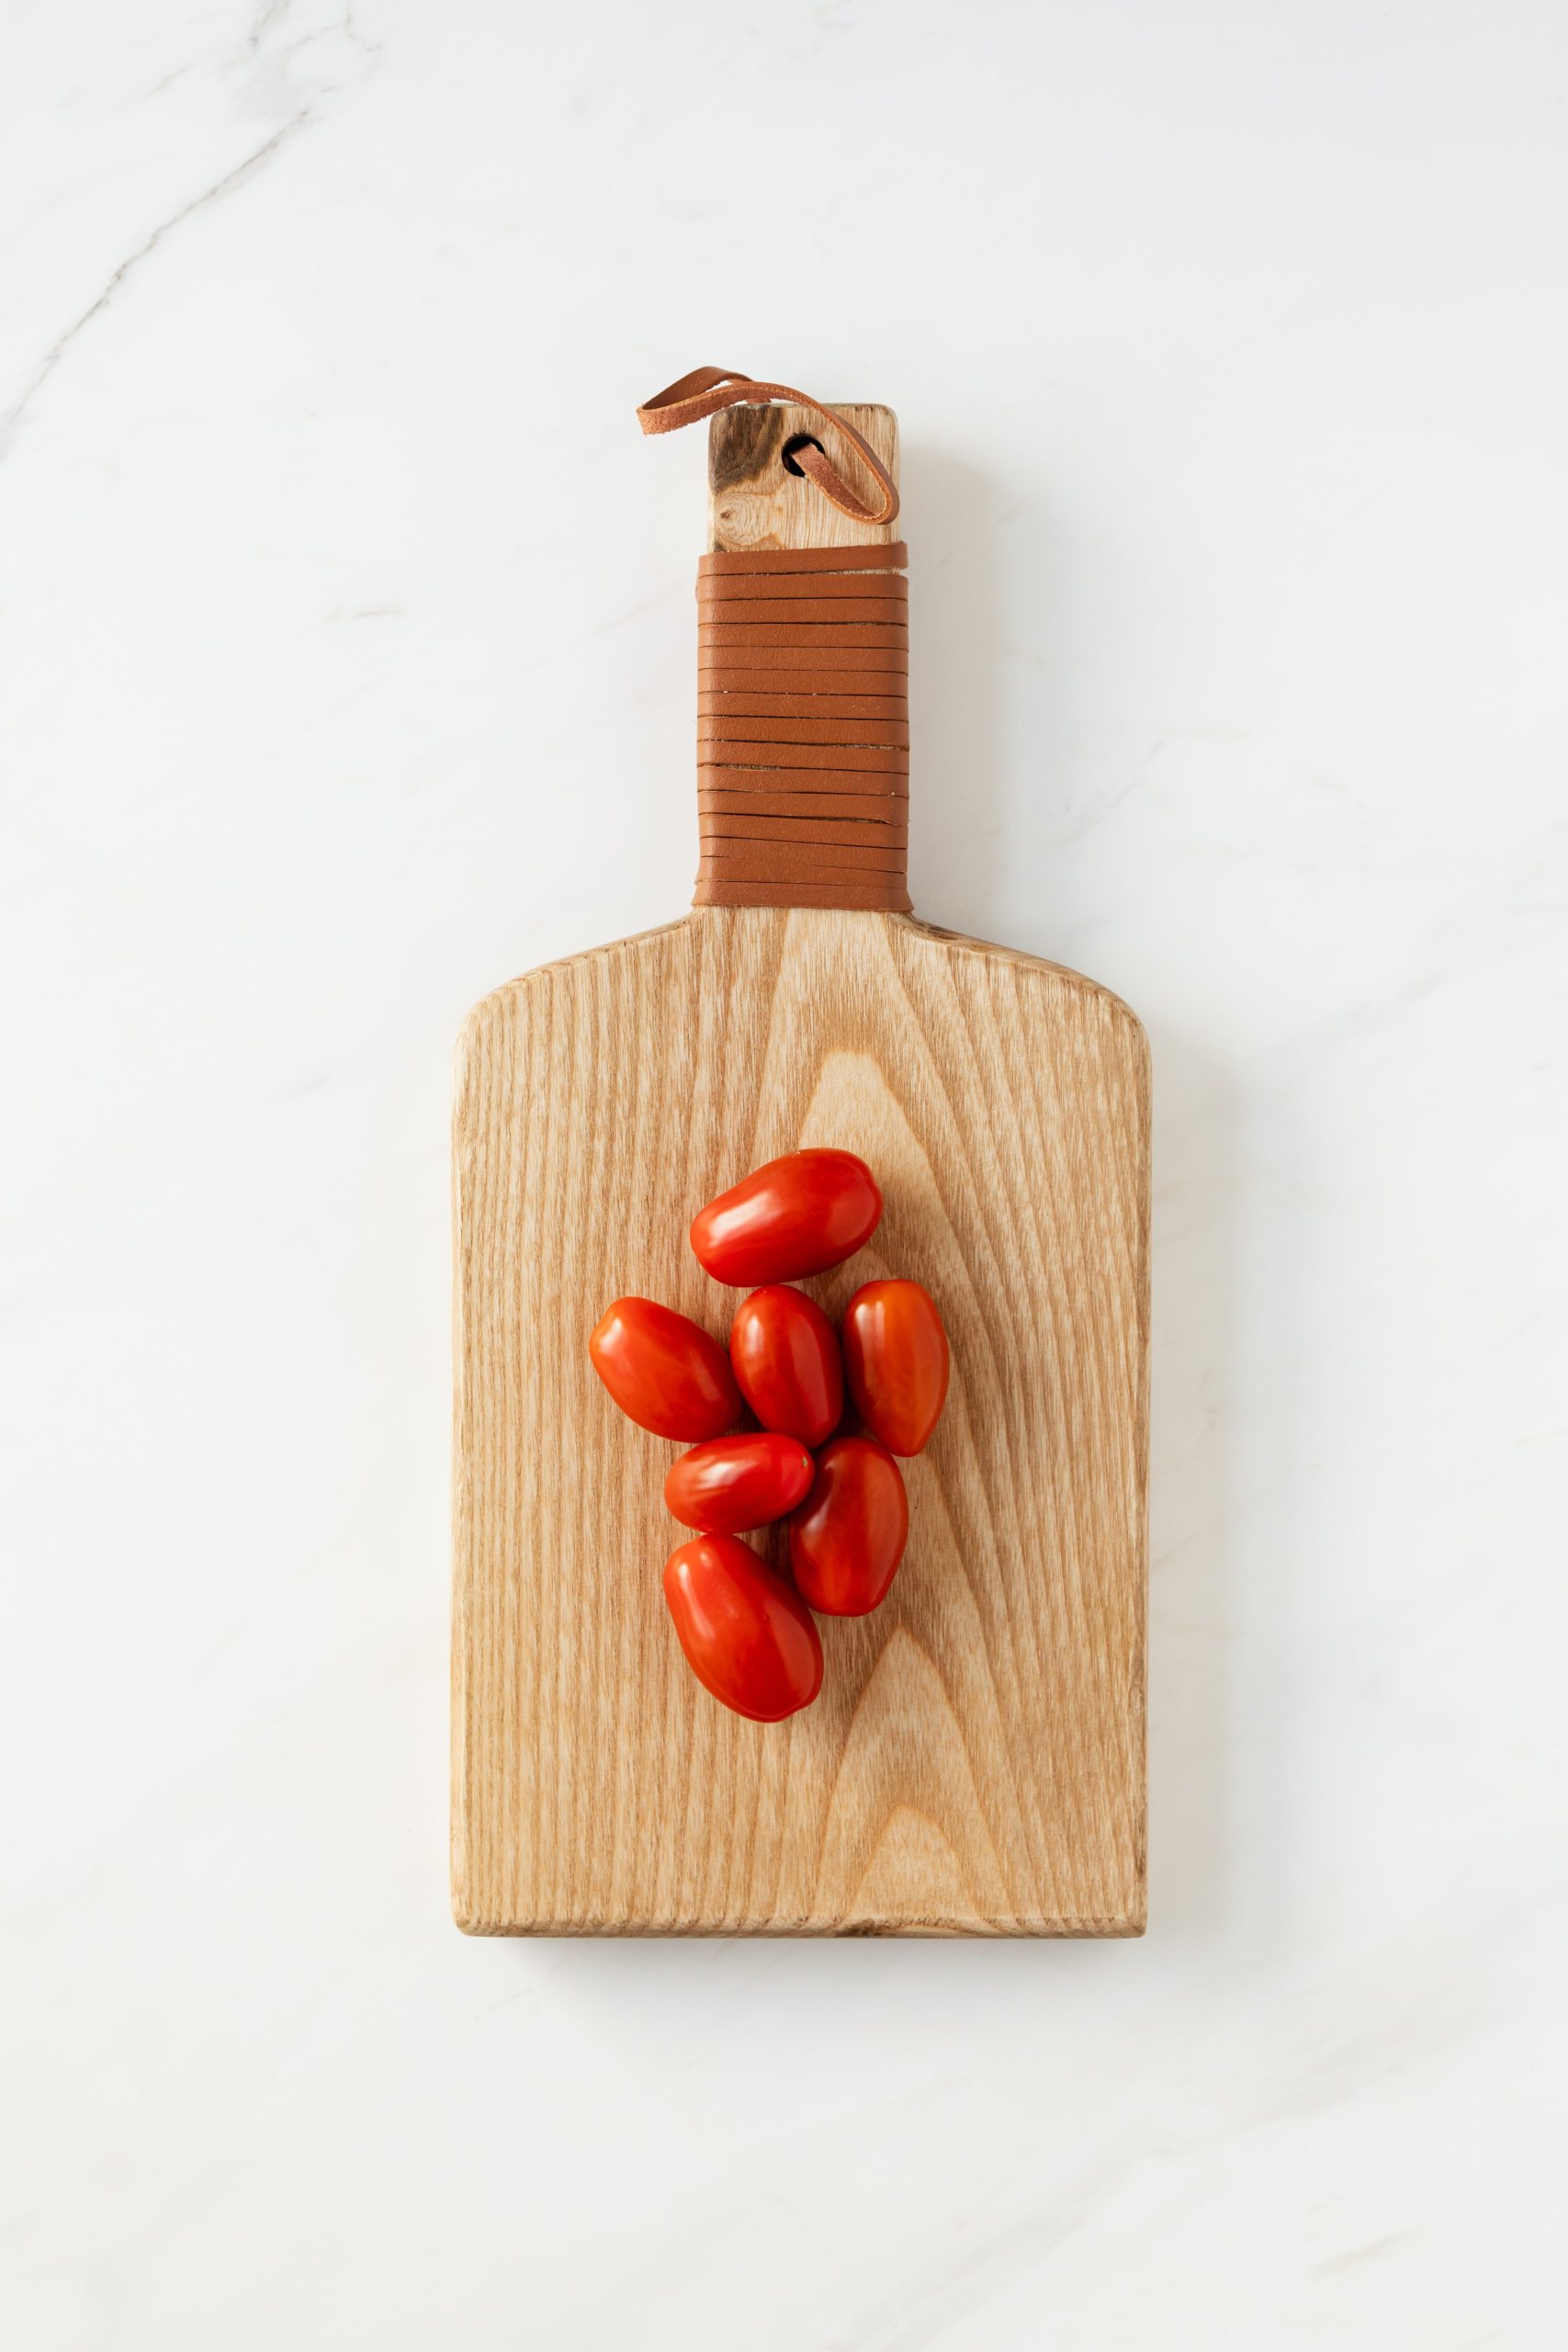 How To Select The Best Walnut Cutting Board